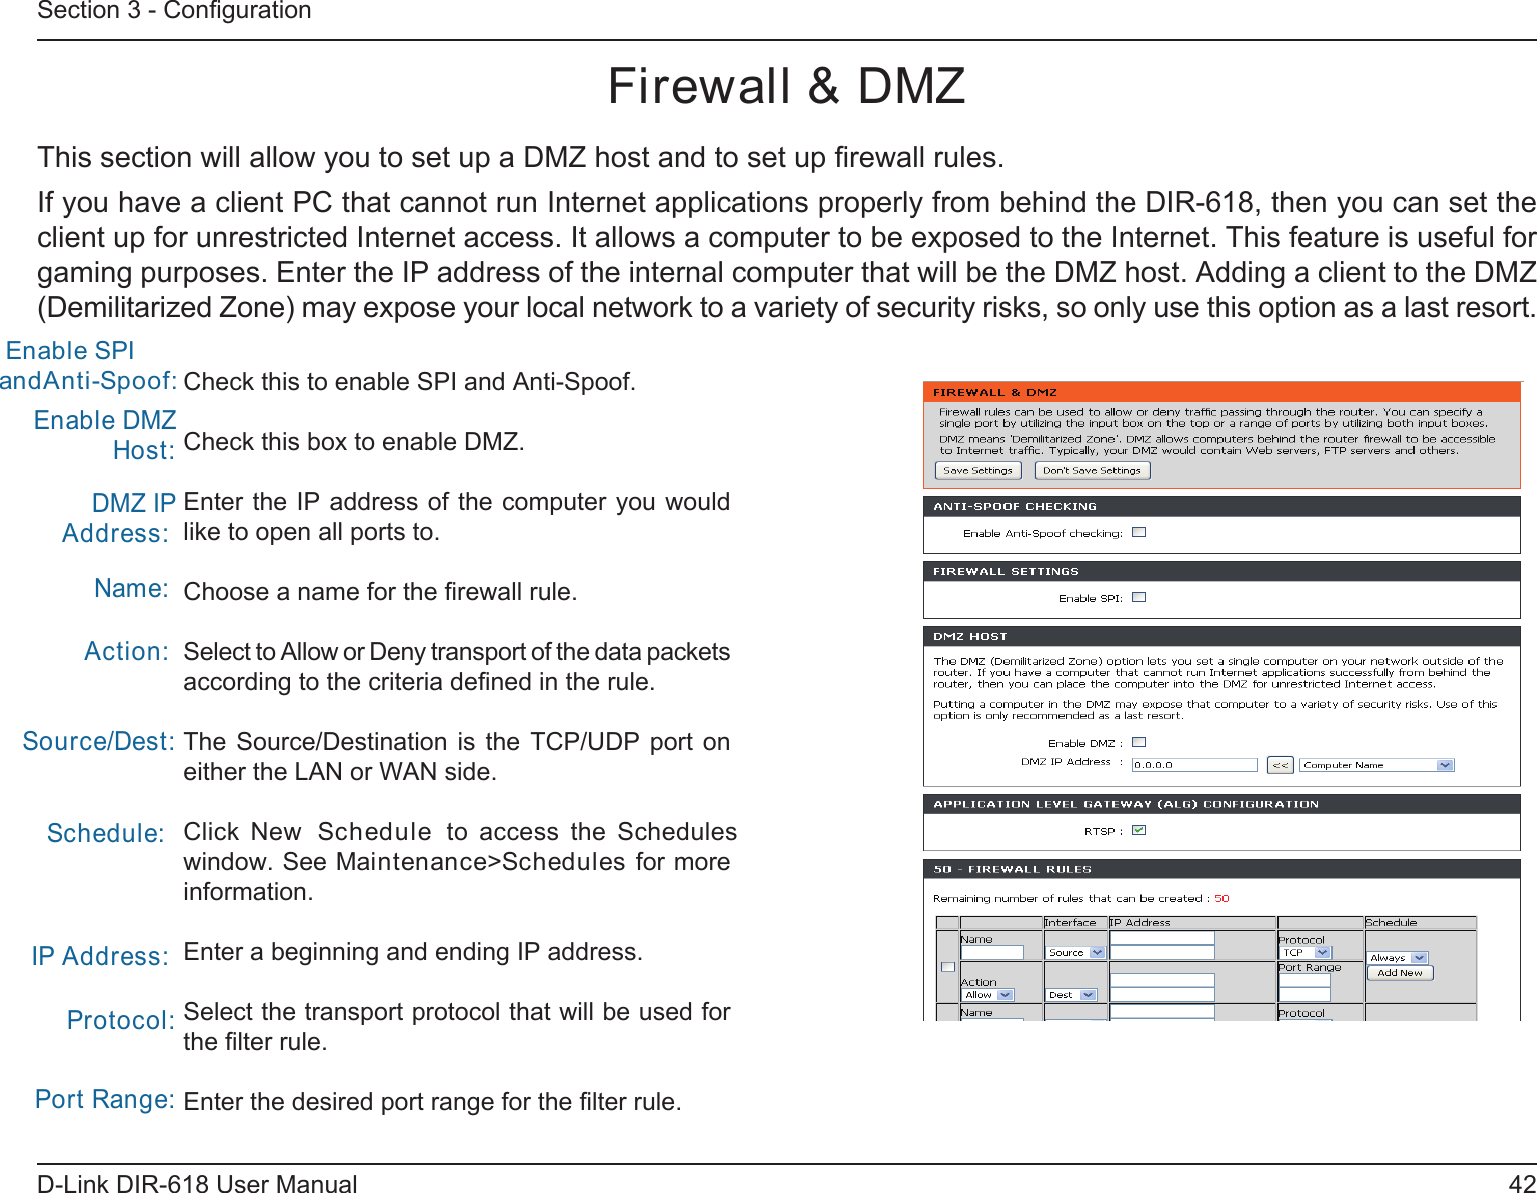 42D-Link DIR-618 User ManualSection 3 - ConﬁgurationFirewall &amp; DMZThis section will allow you to set up a DMZ host and to set up ﬁrewall rules.If you have a client PC that cannot run Internet applications properly from behind the DIR-618, then you can set the client up for unrestricted Internet access. It allows a computer to be exposed to the Internet. This feature is useful for gaming purposes. Enter the IP address of the internal computer that will be the DMZ host. Adding a client to the DMZ(Demilitarized Zone) may expose your local network to a variety of security risks, so only use this option as a last resort.Check this to enable SPI and Anti-Spoof.Check this box to enable DMZ.Enter the IP address of the computer you would like to open all ports to.Choose a name for the ﬁrewall rule.Select to Allow or Deny transport of the data packets according to the criteria deﬁned in the rule. The  Source/Destination  is  the  TCP/UDP  port  on either the LAN or WAN side.Click  New  Schedule  to  access  the  Schedules window. See Maintenance&gt;Schedules for more information.Enter a beginning and ending IP address.Select the transport protocol that will be used for the ﬁlter rule.Enter the desired port range for the ﬁlter rule.Enable DMZ Host:DMZ IP Address:Name:Action:Source/Dest:Schedule:IP Address:Protocol:Port Range: Enable SPI andAnti-Spoof:    